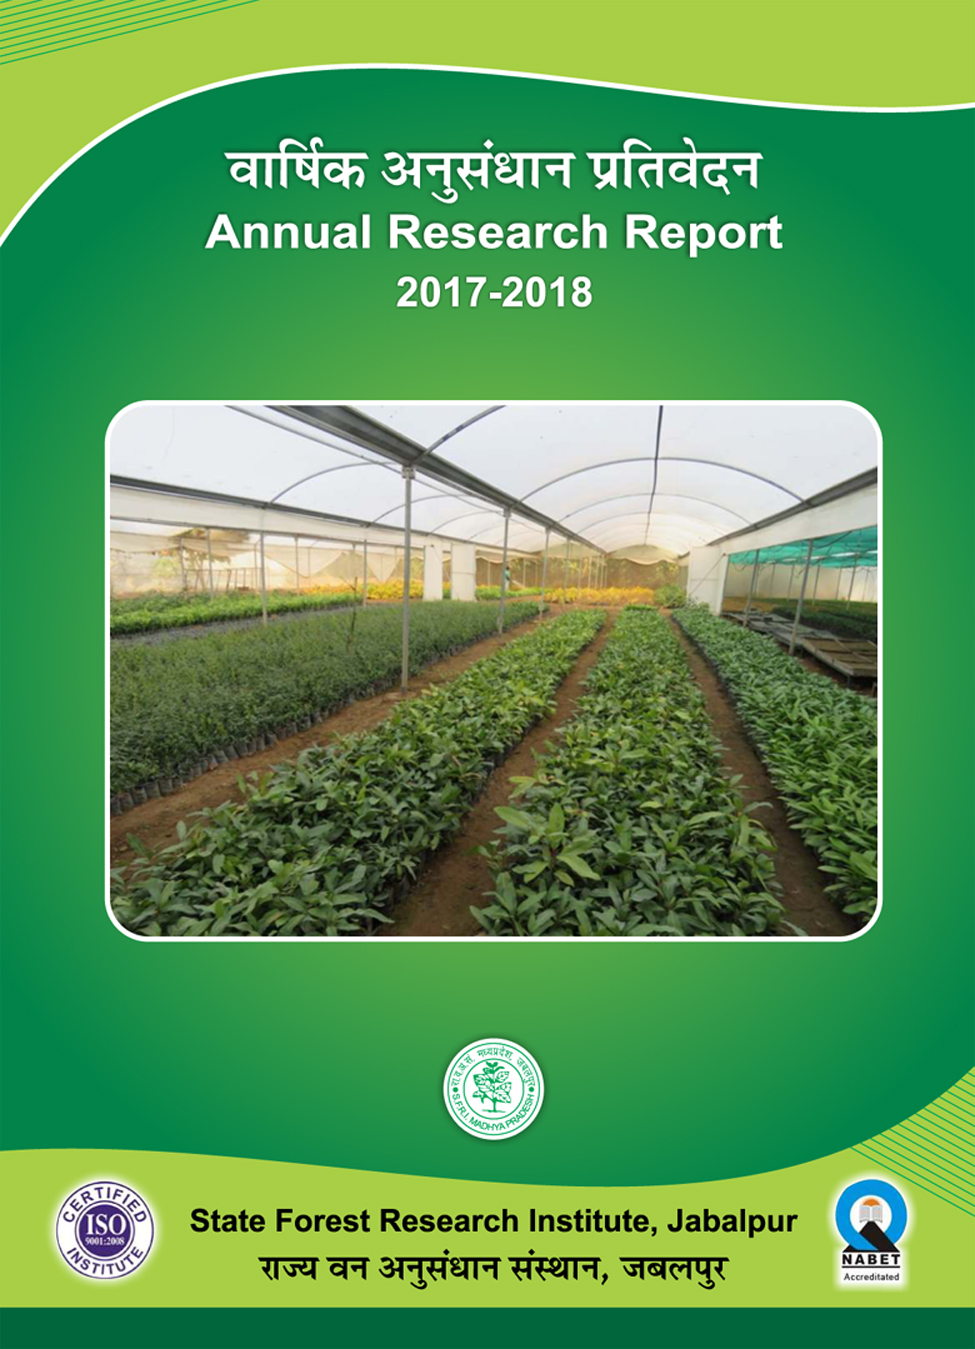 Annual Research Report 2017-2018